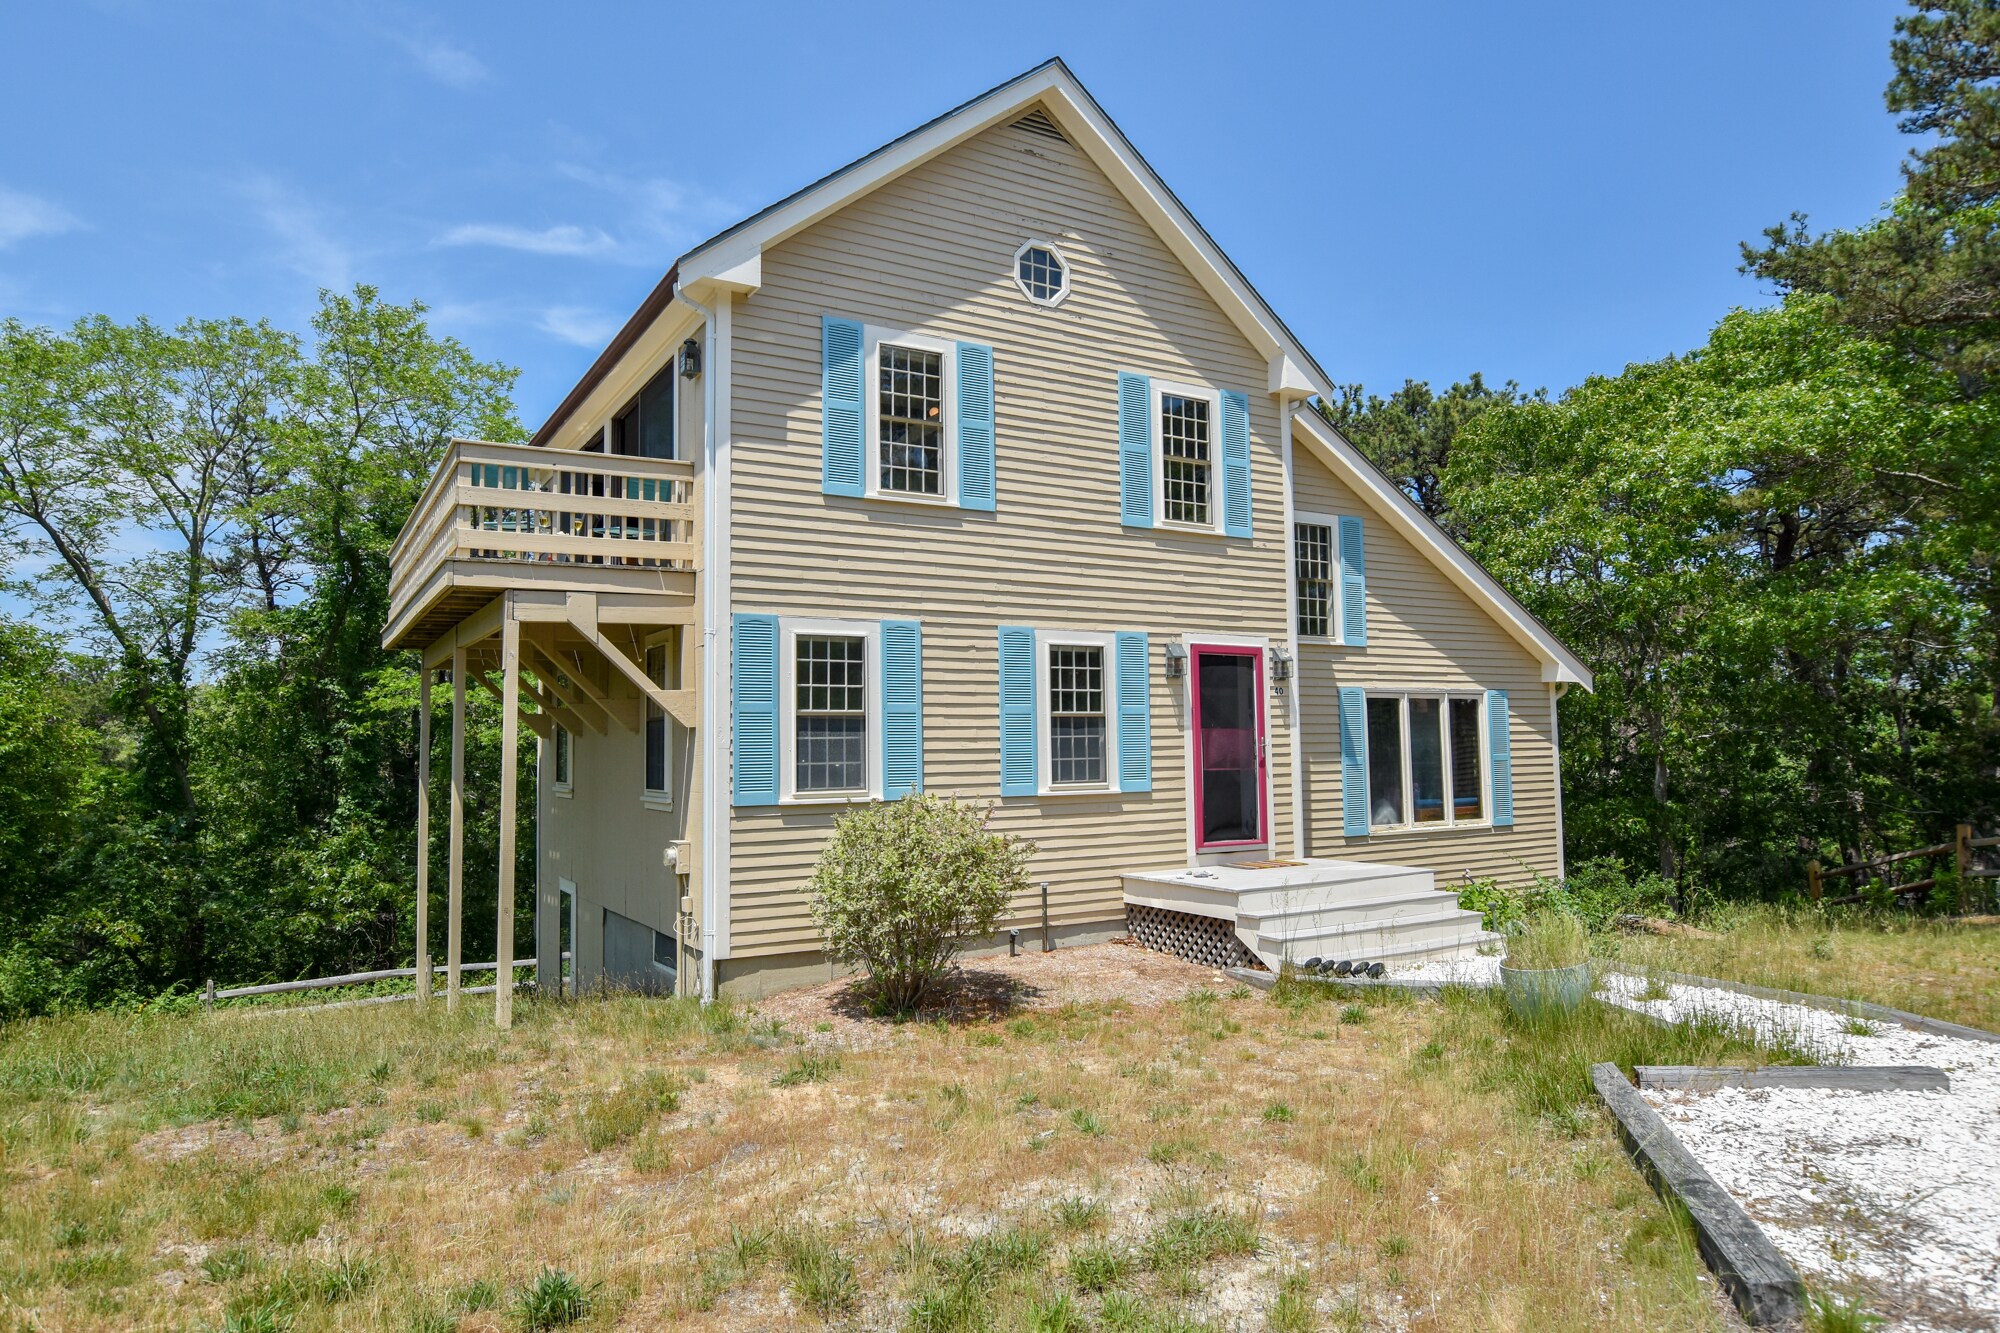 Property Image 2 - 13343: Wellfleet Oceanside! Spacious, Private Yard, Outdoor Shower, Walk to Downtown!